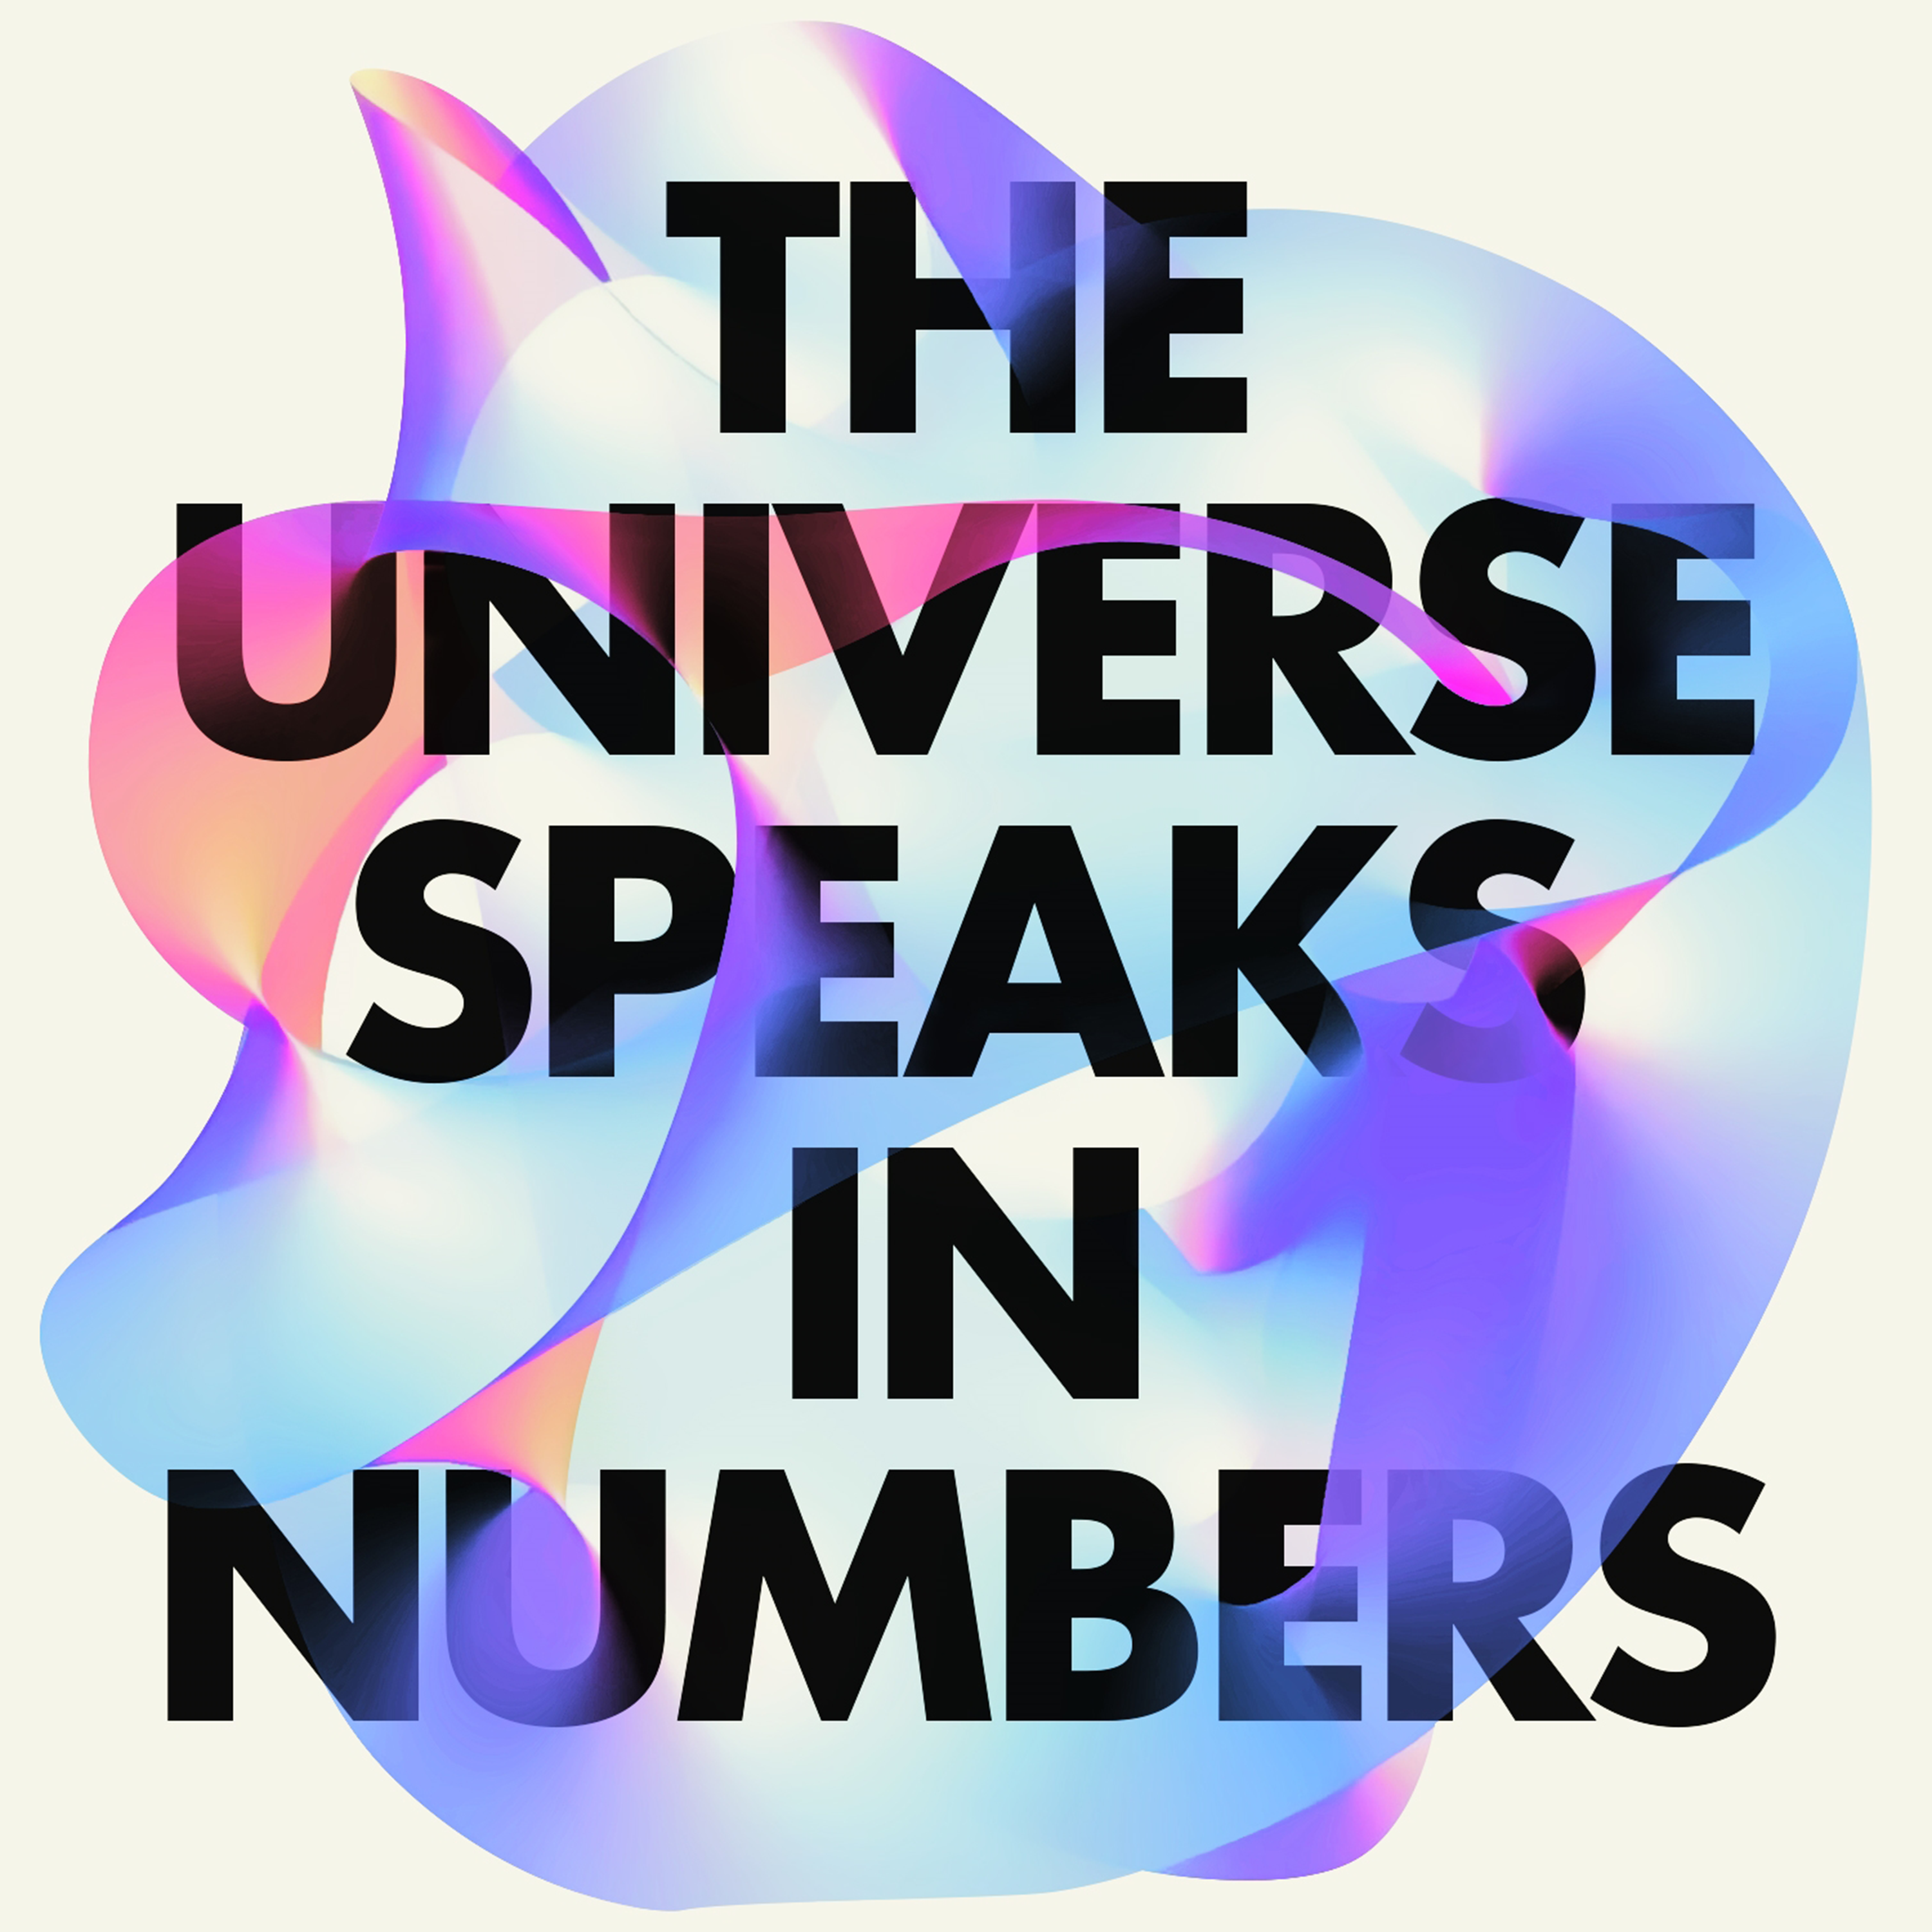 The Universe Speaks in Numbers: Karen Uhlenbeck interviewed by Graham Farmelo